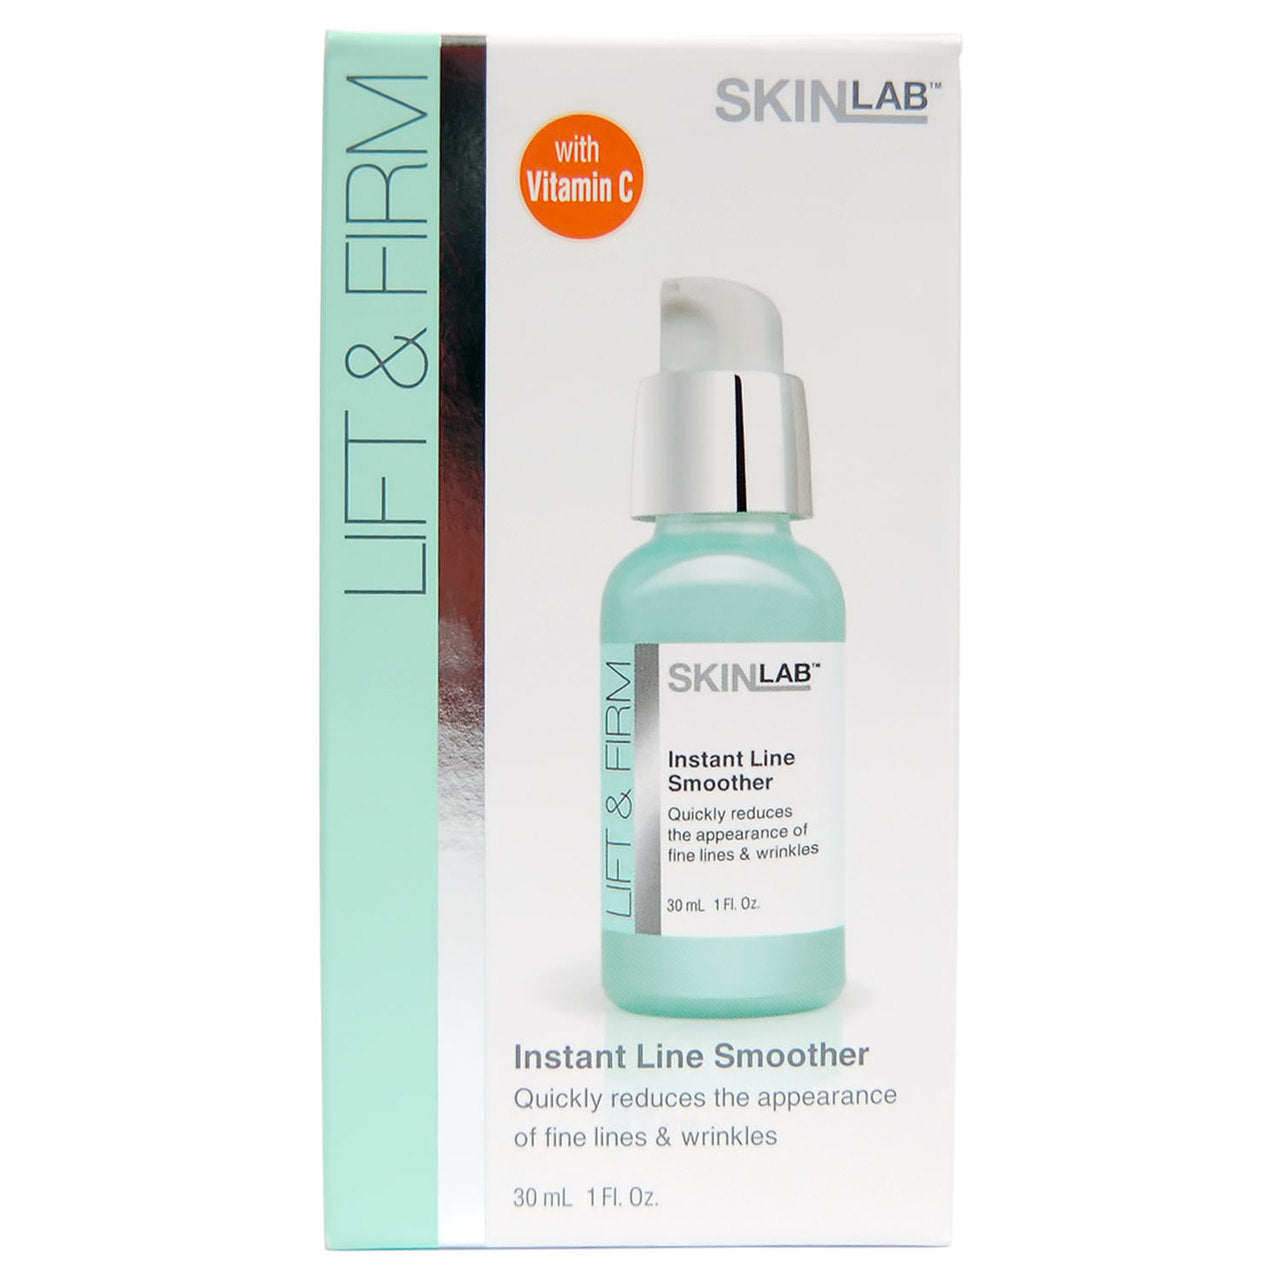 SKINLAB Lift & Firm Instant Line Smoother - ADDROS.COM